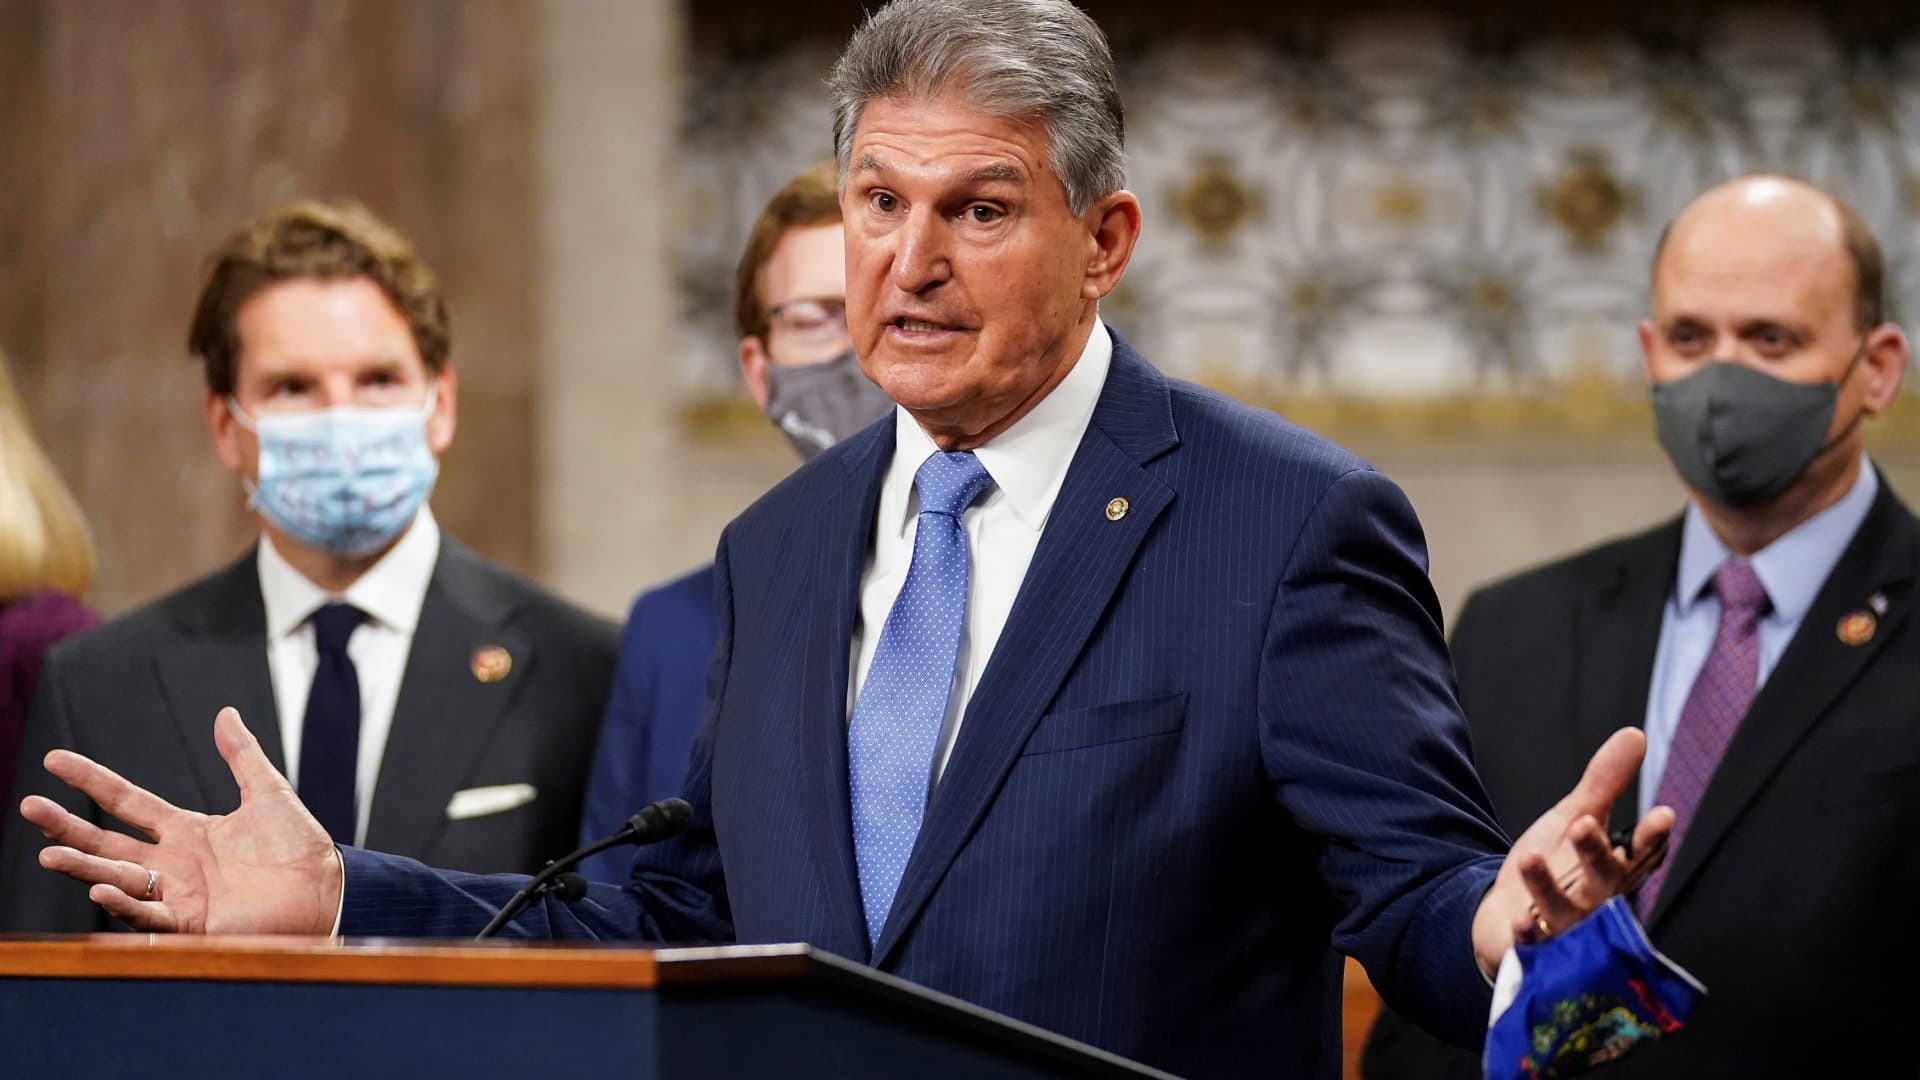 Senator Joe Manchin (D-WVA) removes his mask to speak as bipartisan members of the Senate and House gather to announce a framework for fresh coronavirus disease (COVID-19) relief legislation at a news conference on Capitol Hill in Washington, December 1, 2020.